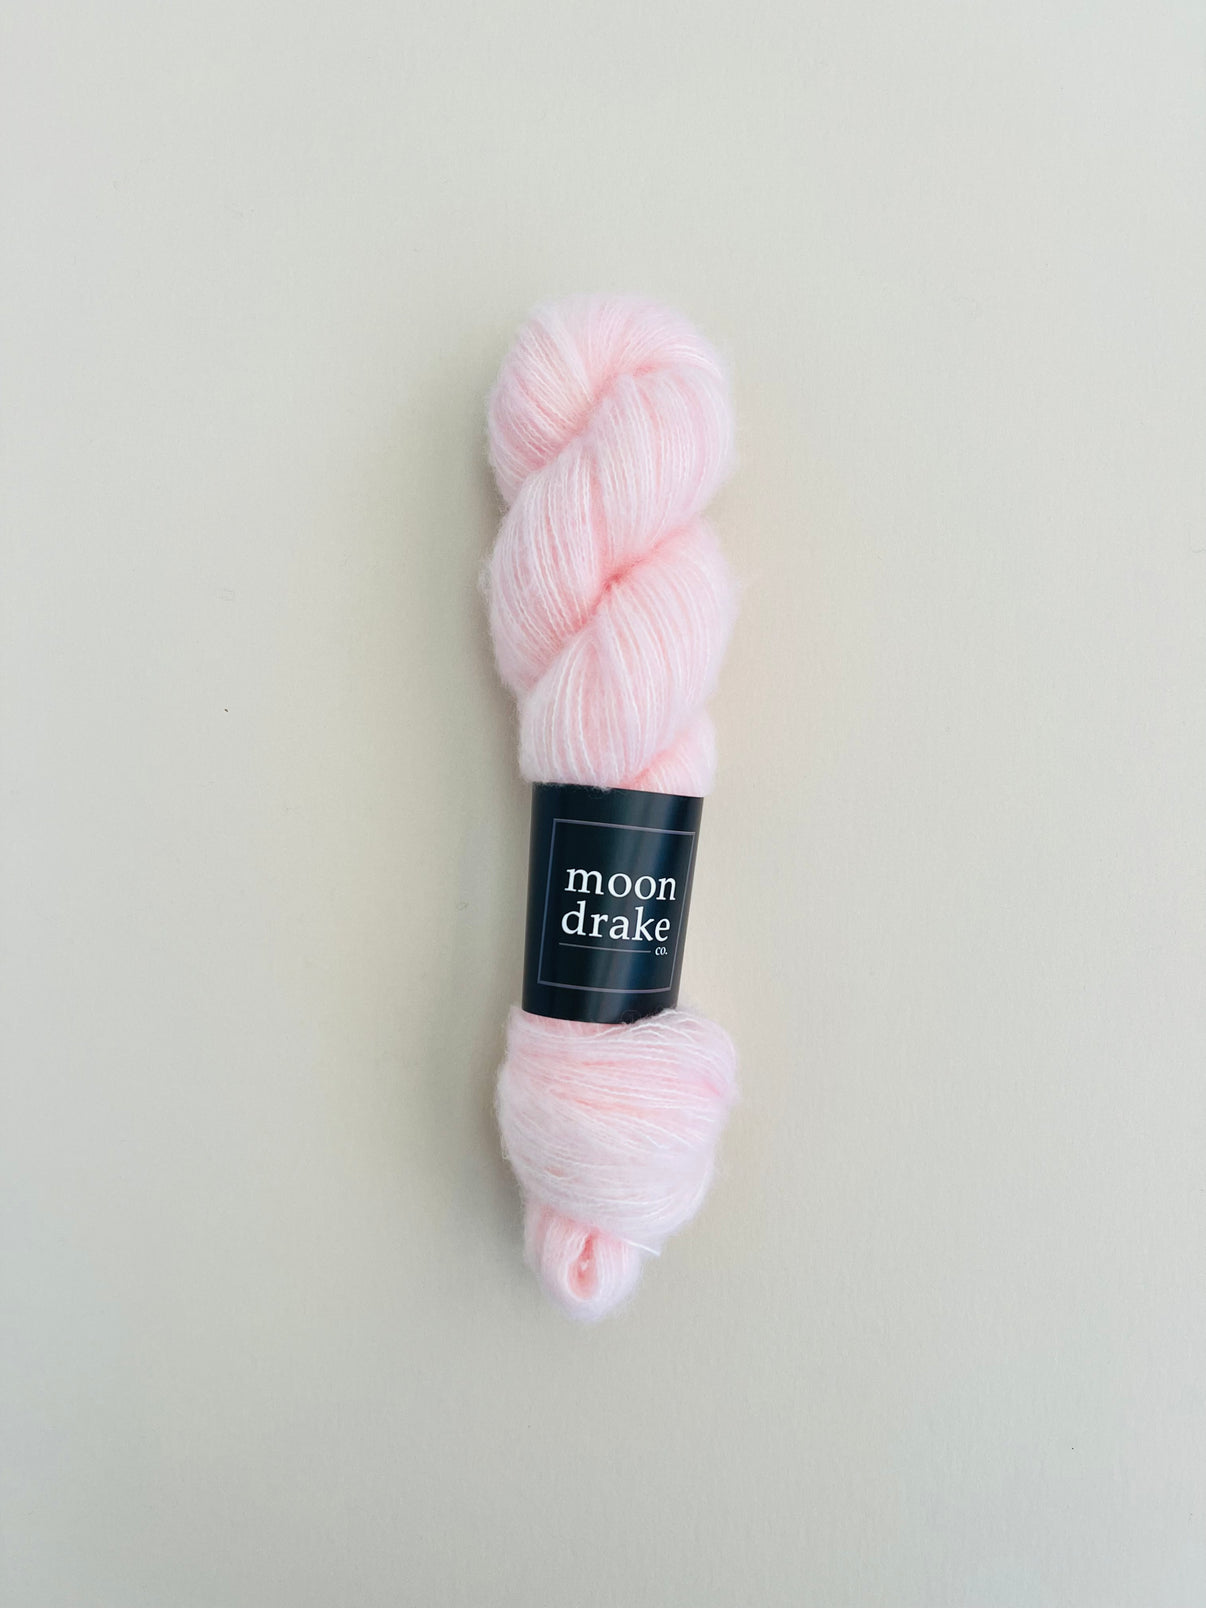 A powder pink skein of brushed cashmere merino yarn with a black label.